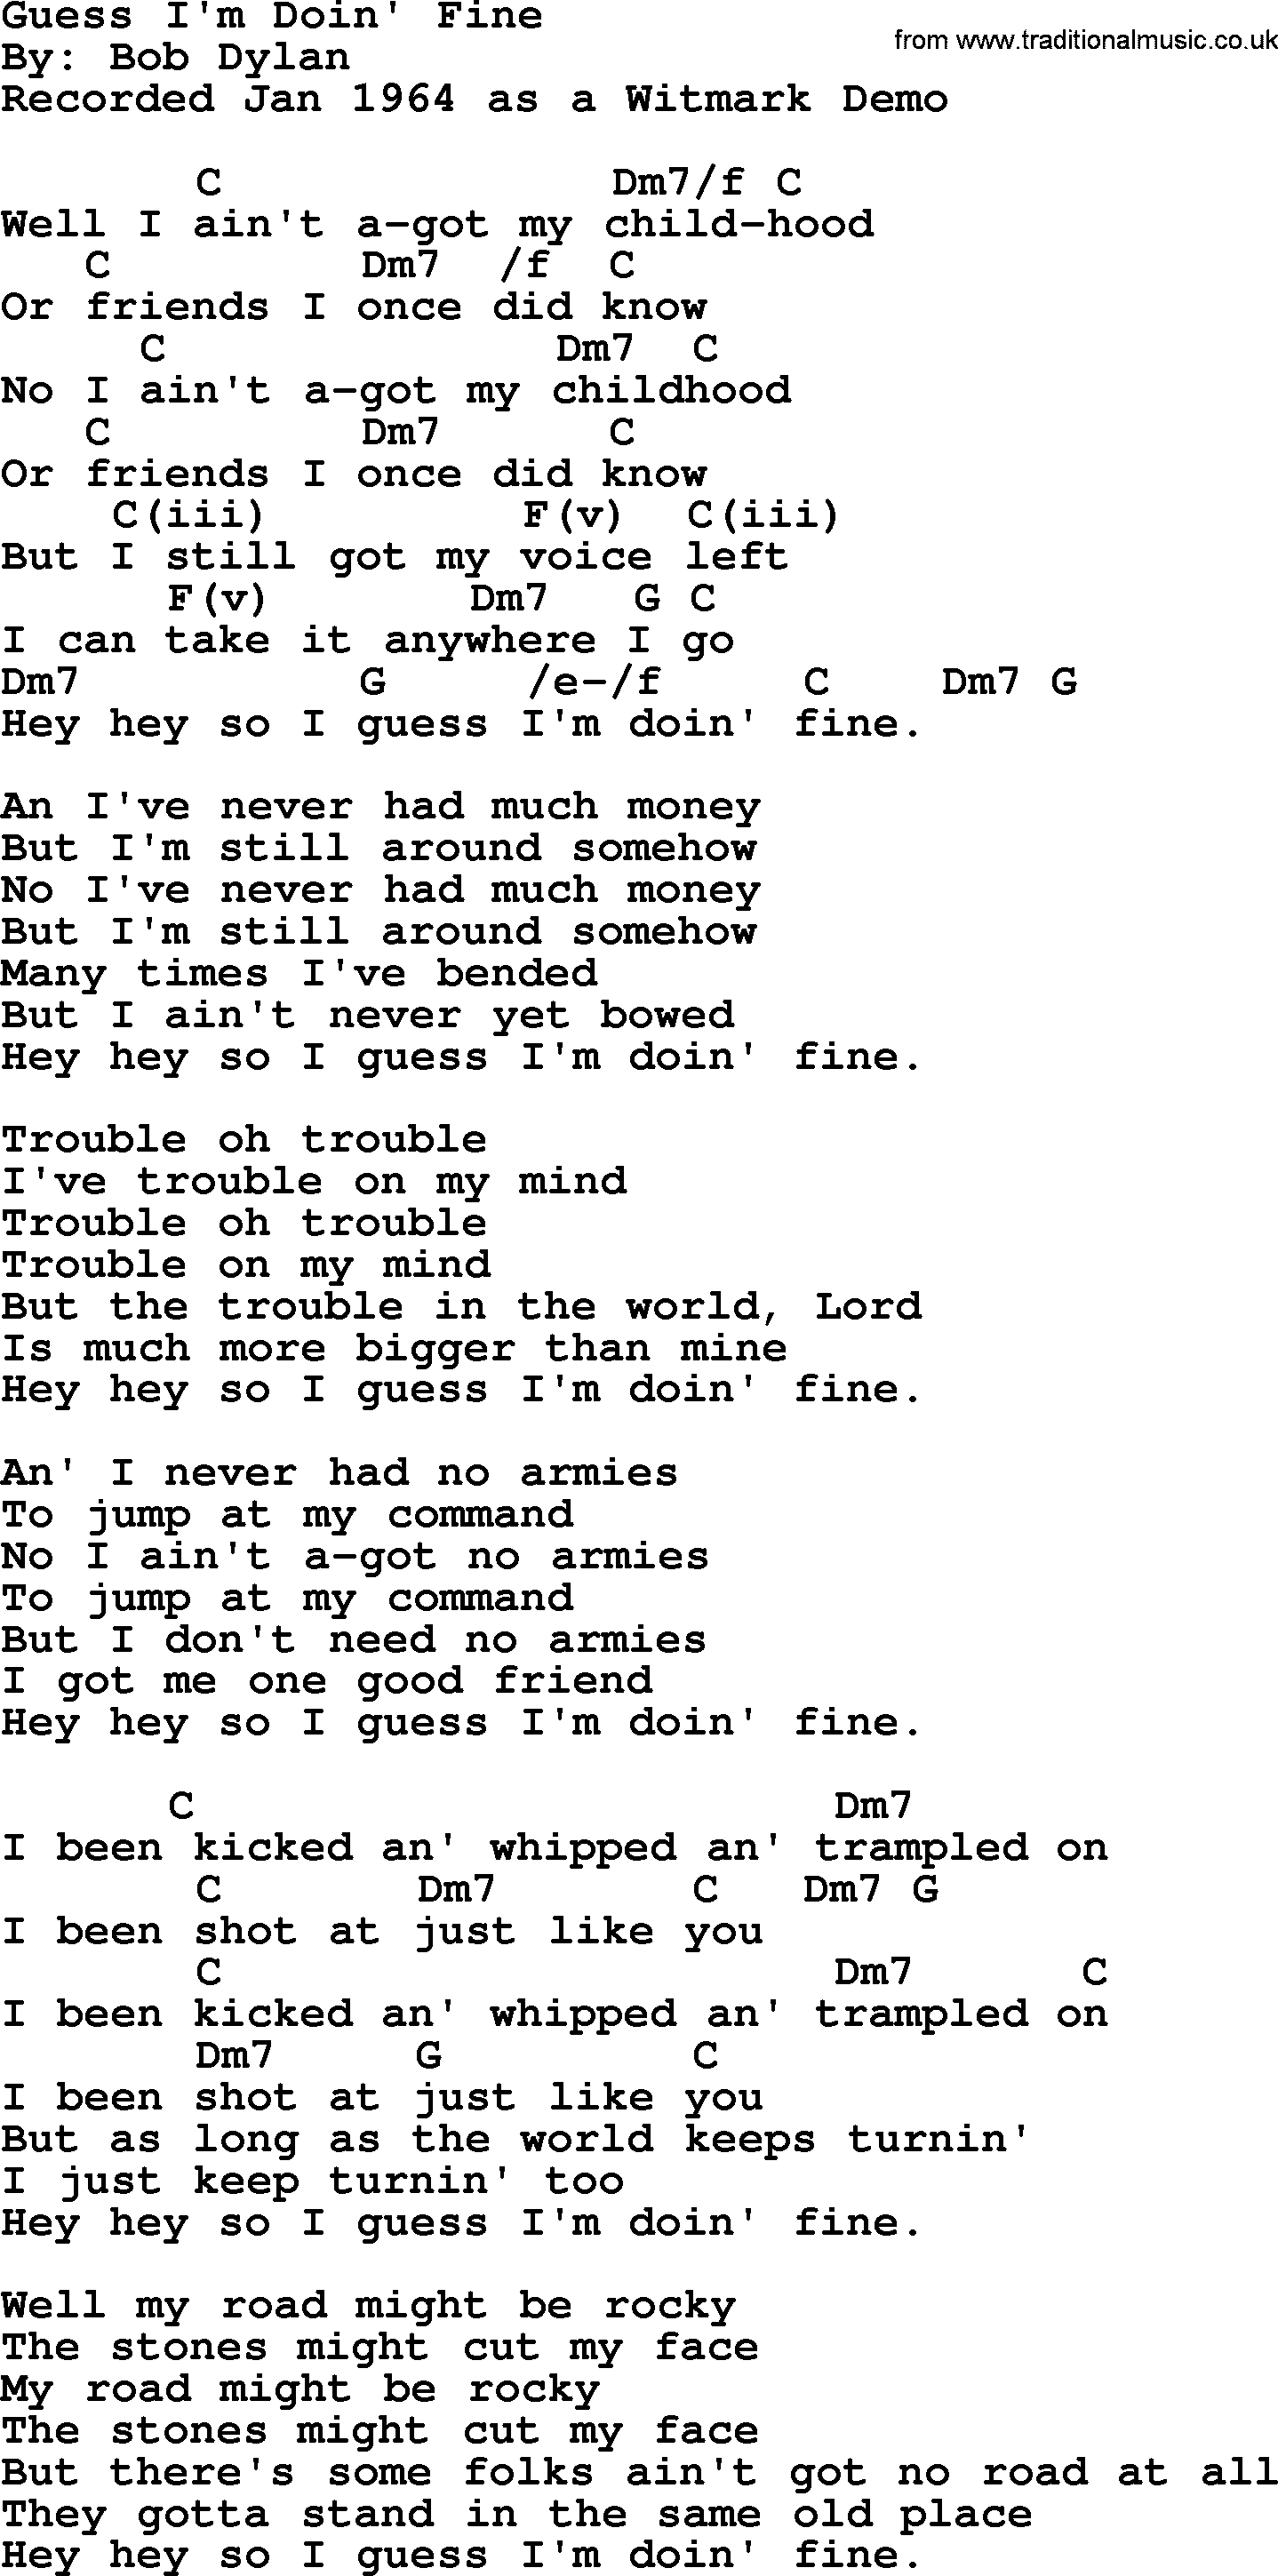 Bob Dylan song, lyrics with chords - Guess I'm Doin' Fine